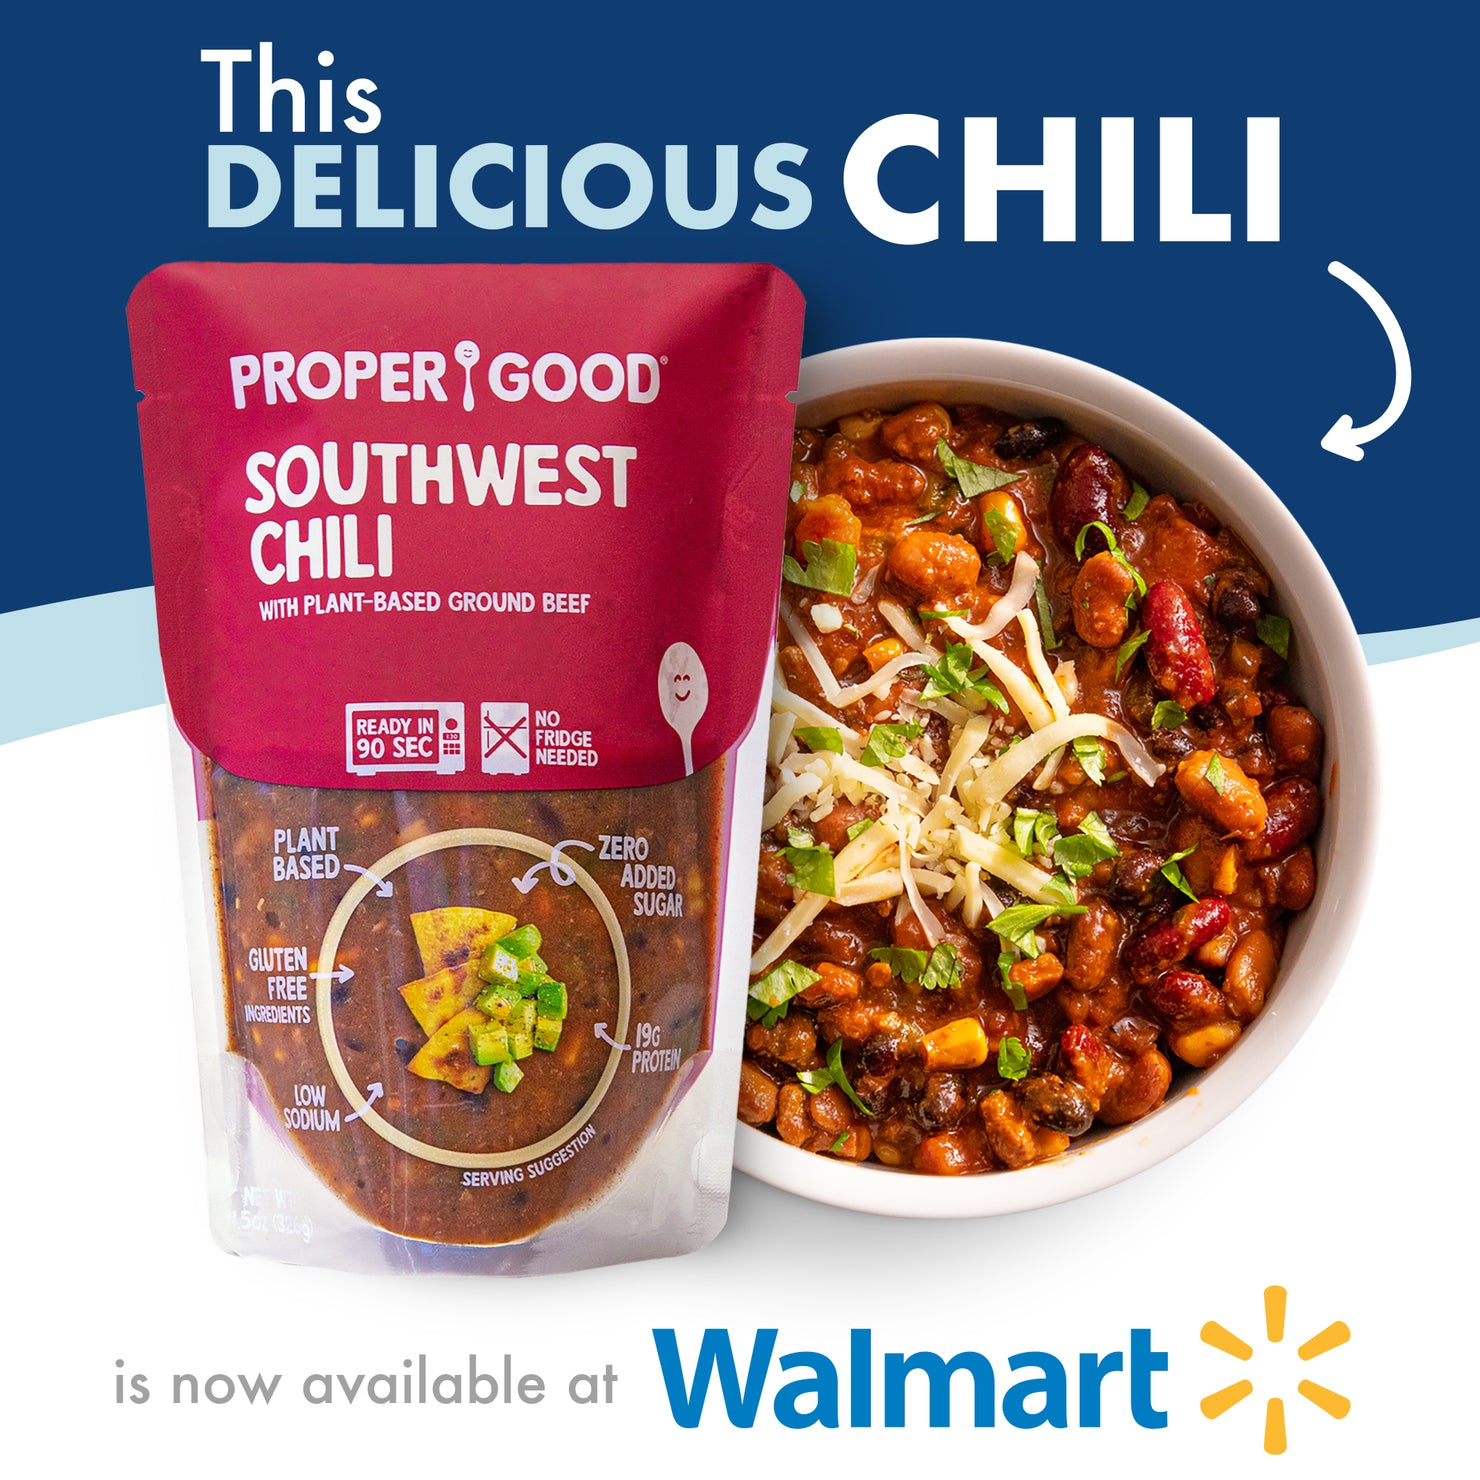 Southwest Chili available in Walmart - Eat Proper Good